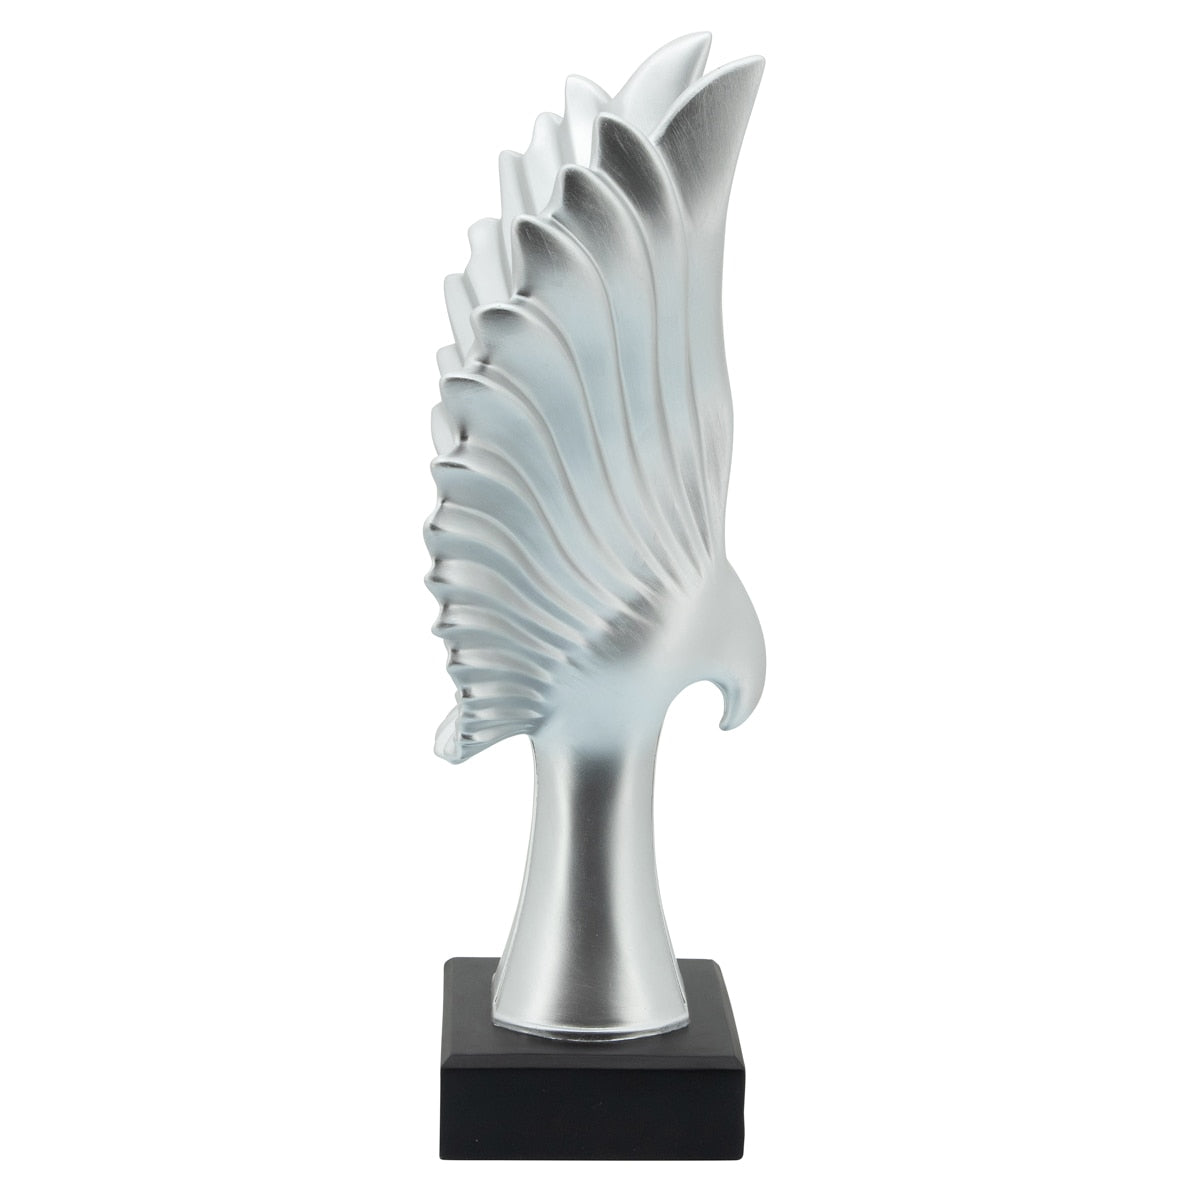 Resin 20"h Eagle Table Accent, Silver